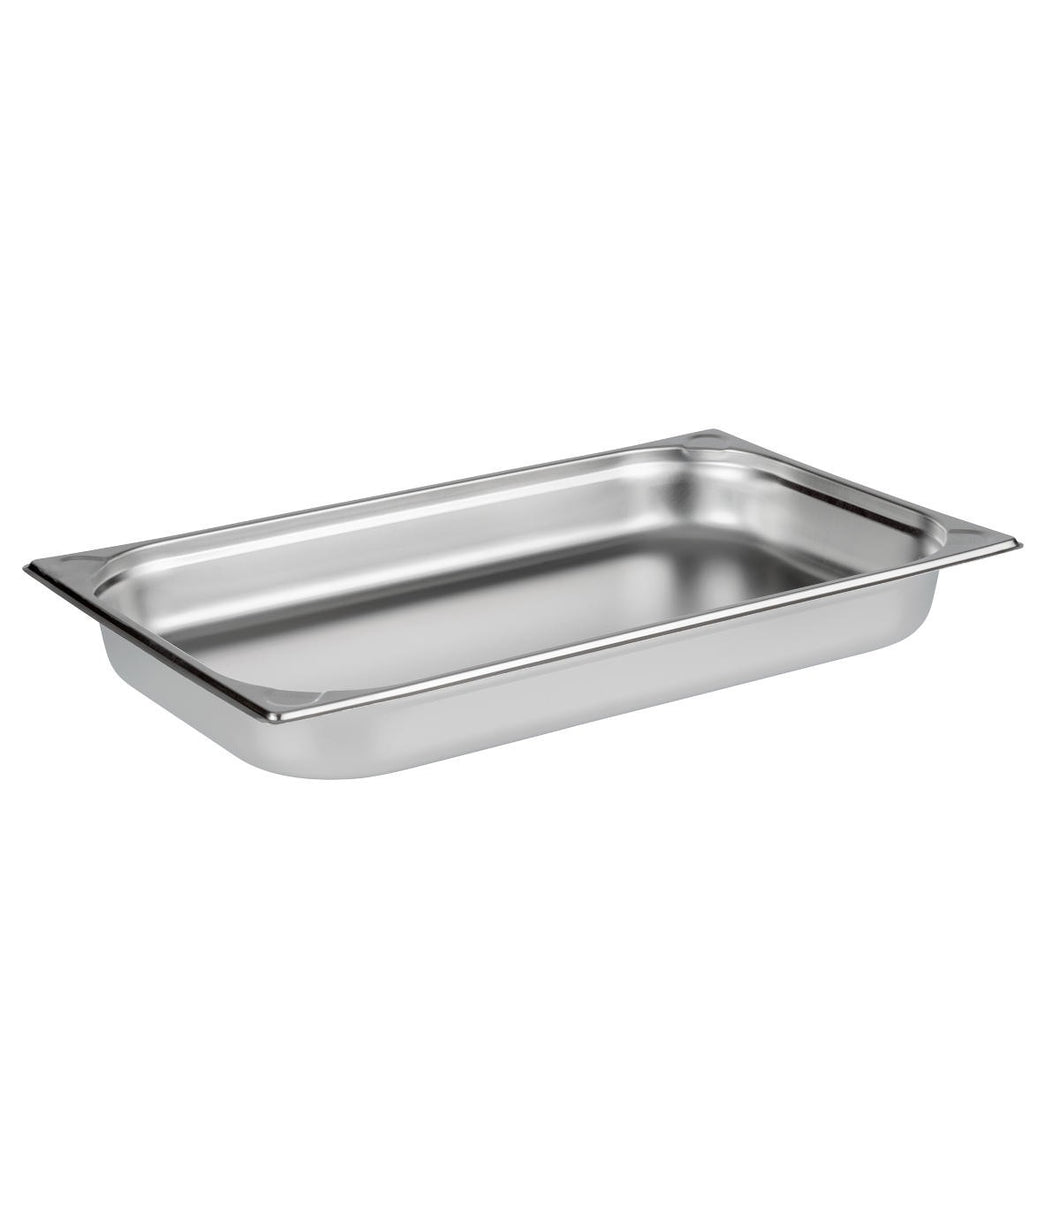 Stainless Steel Matte Finish Anti-Jam GN Pan 1/1 40MM (1.5 Inches), NSF, Gastronorm Pan